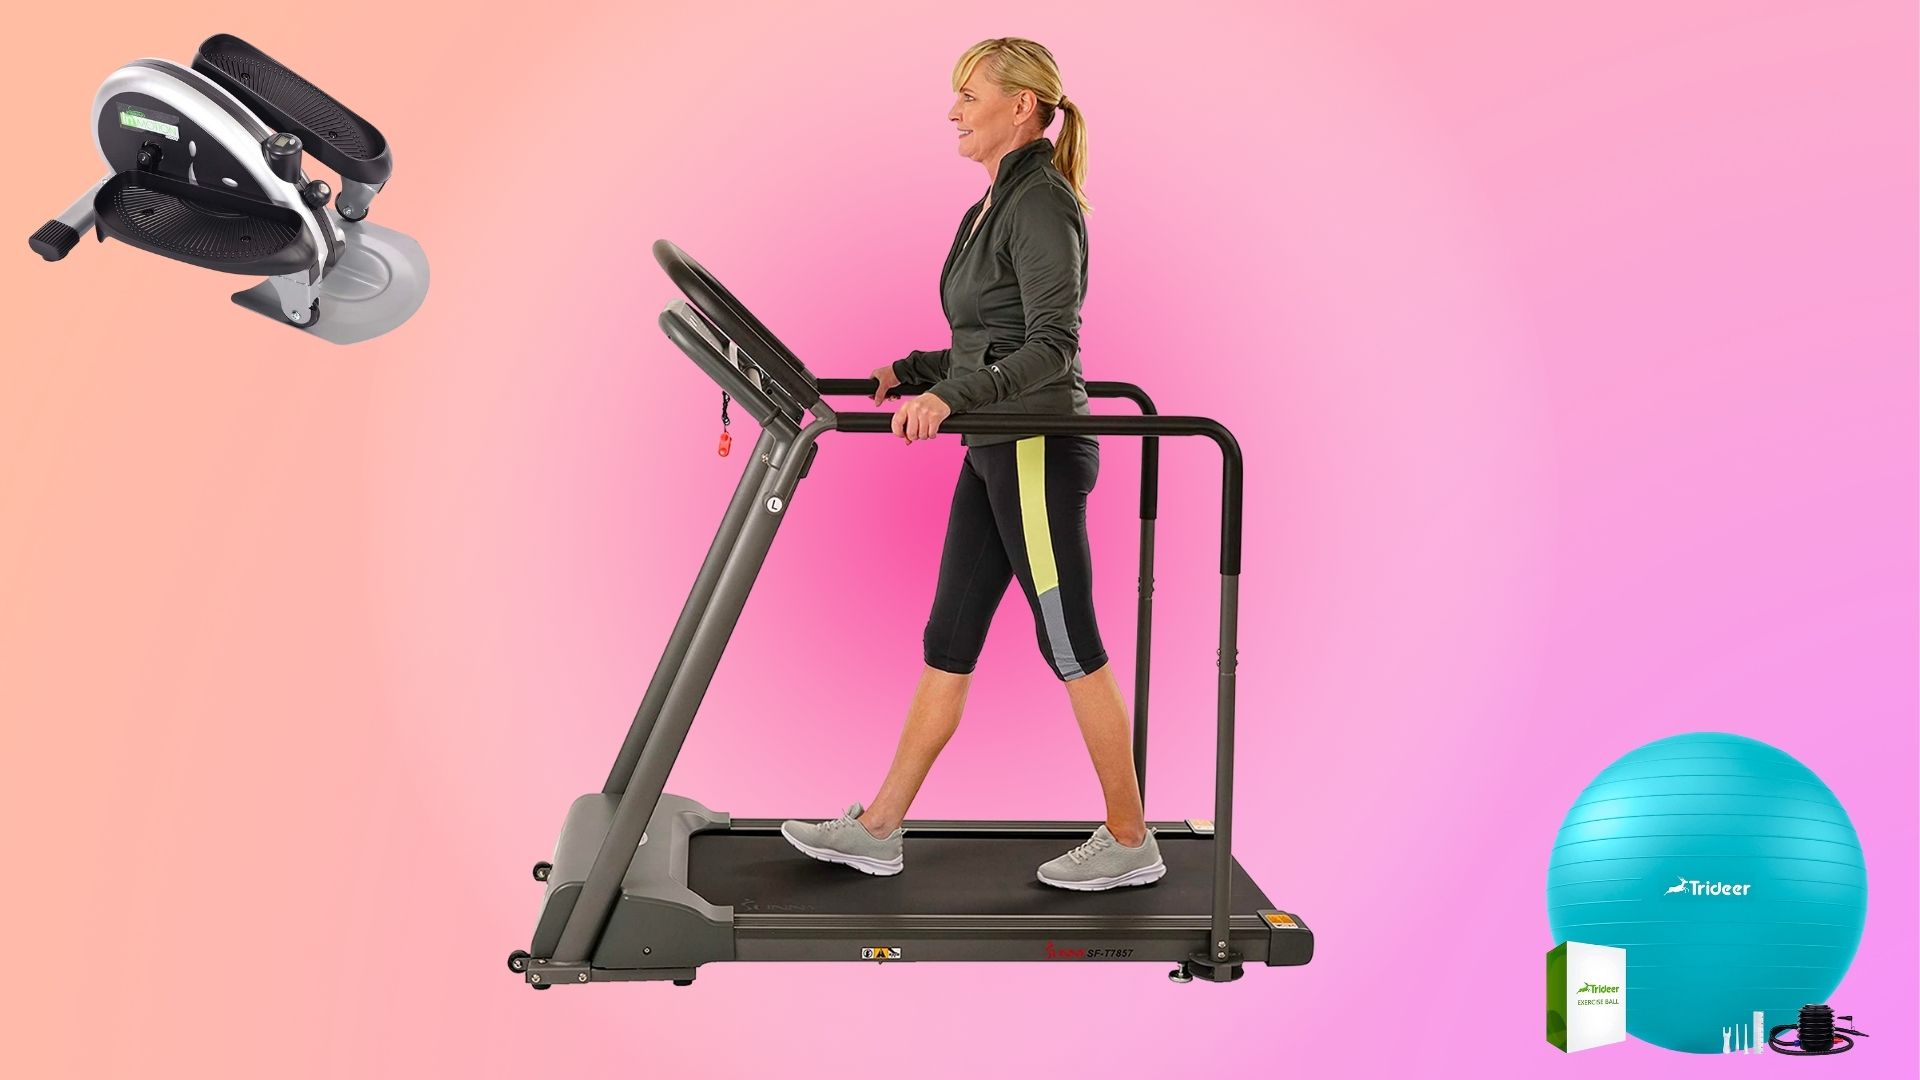 21 Best Home Exercise Equipment for Seniors: How to Stay Fit Over 50